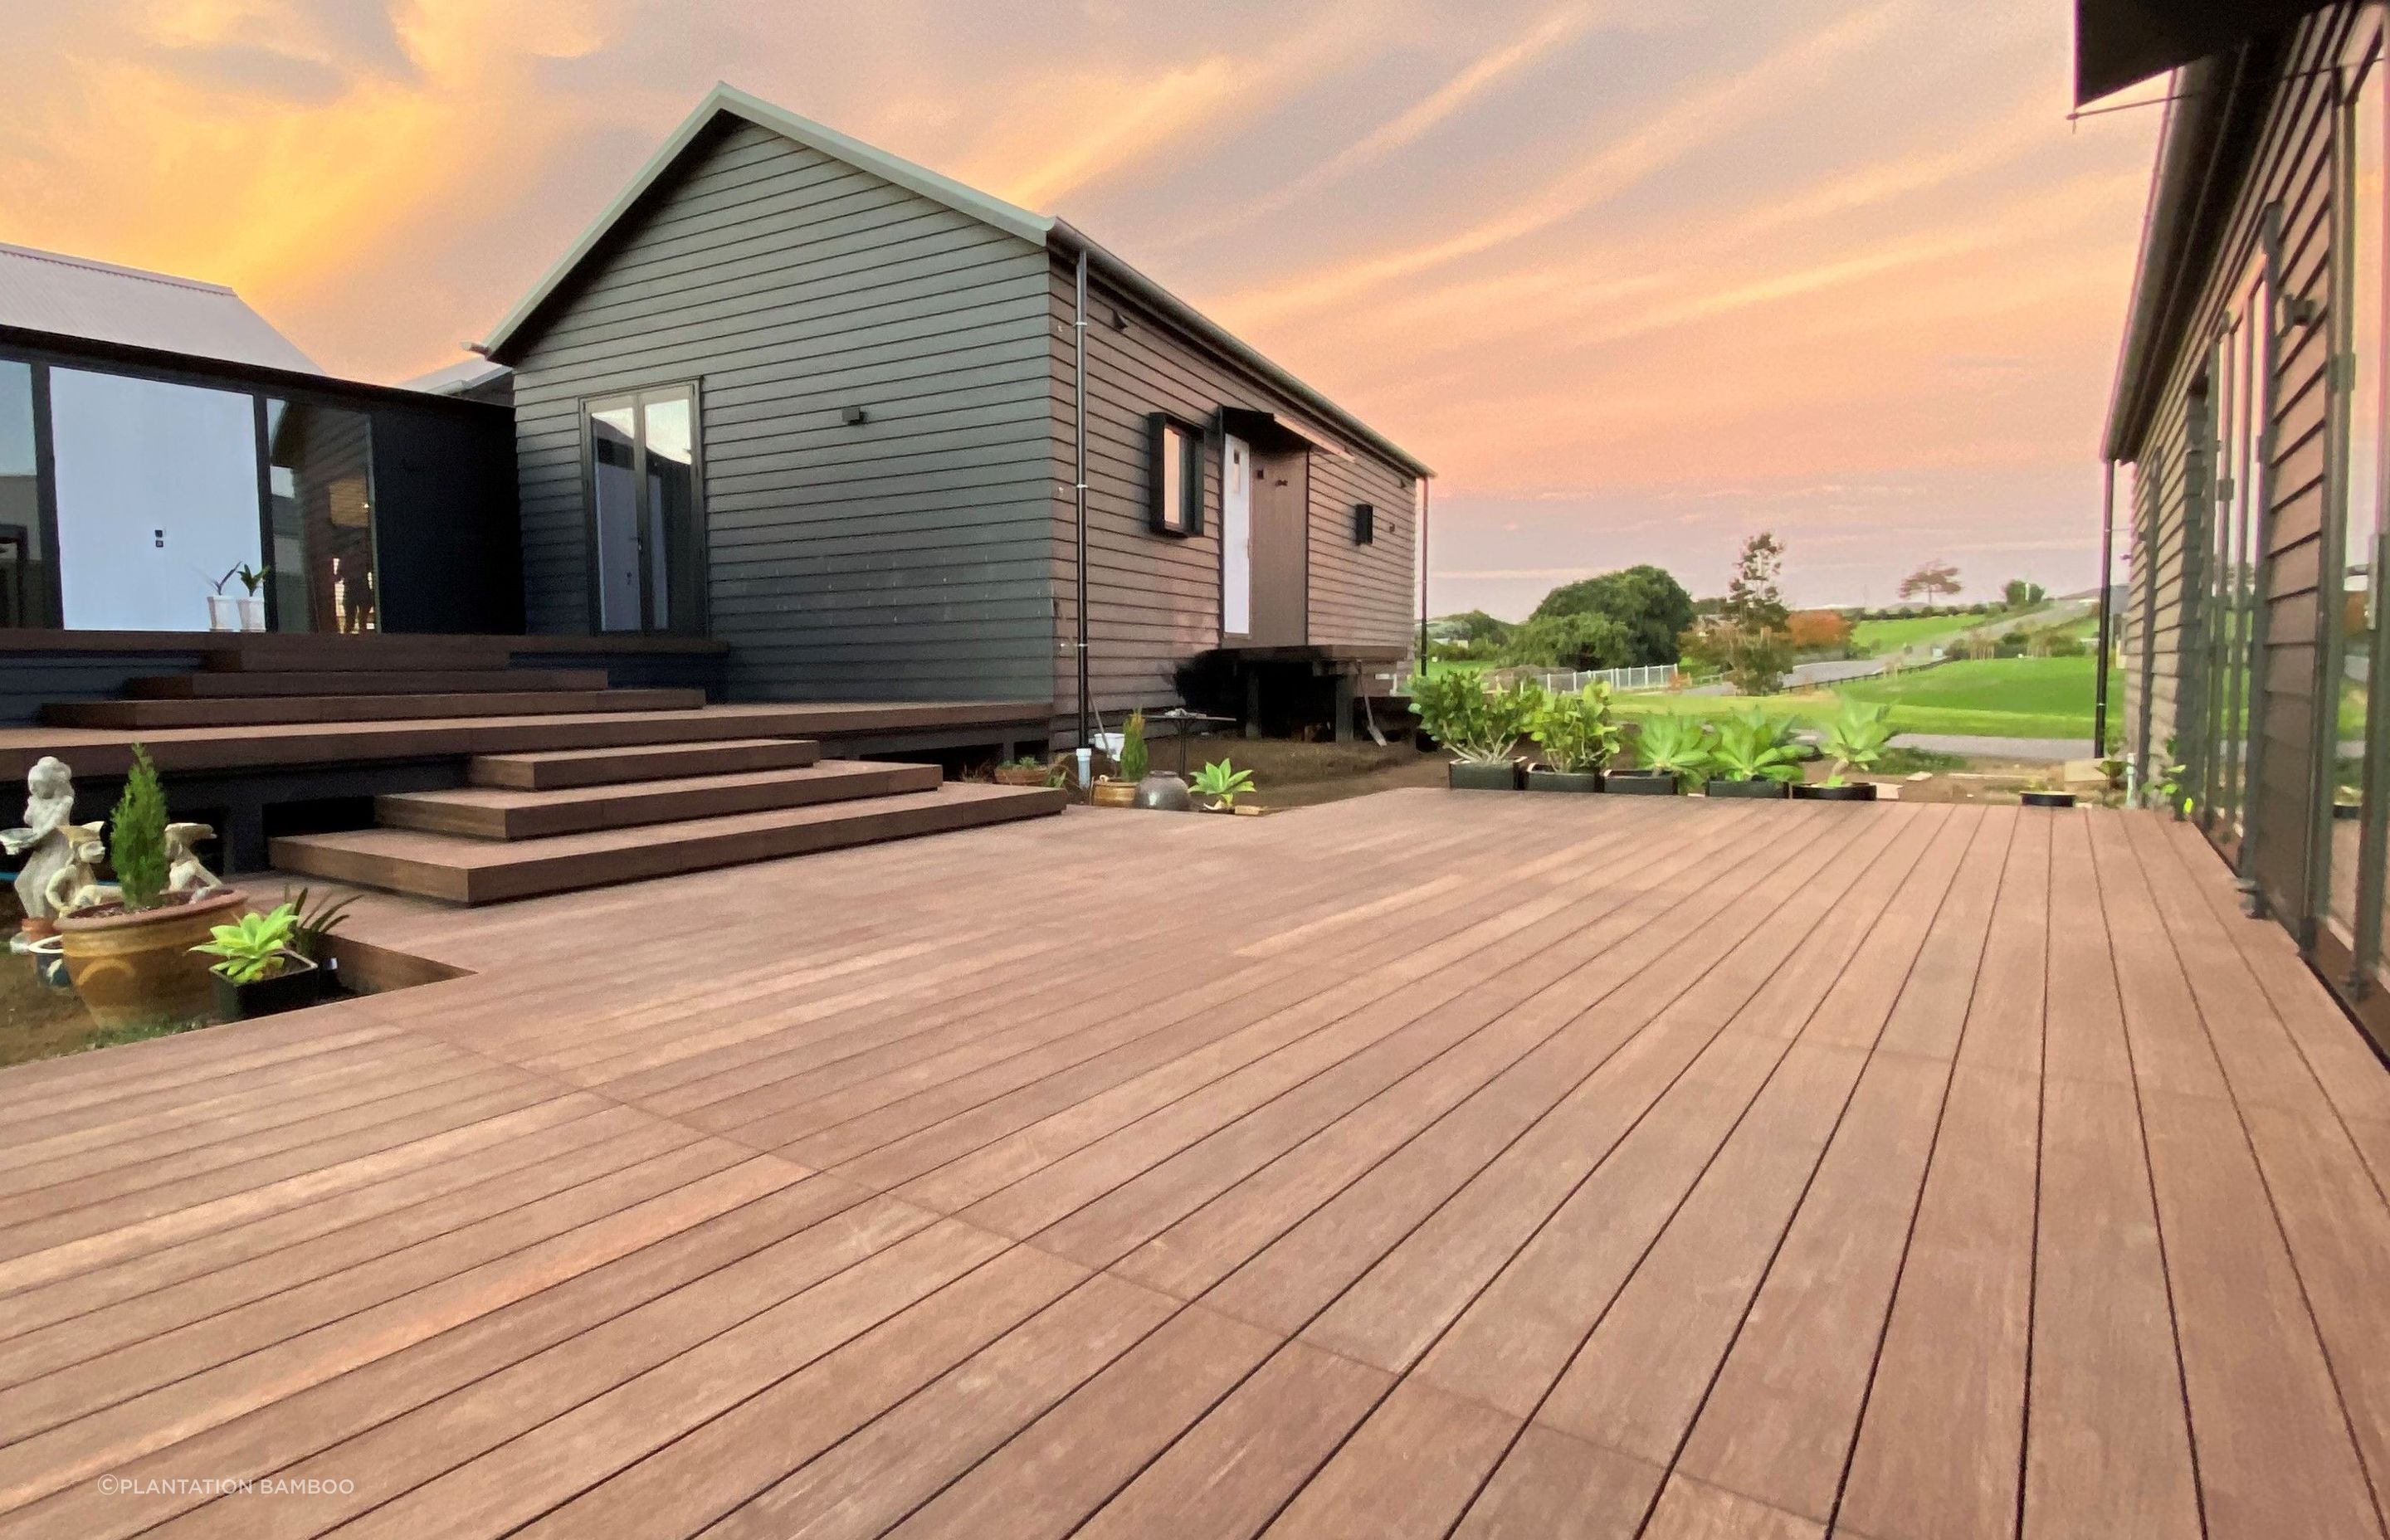 Bamboo X-treme Decking from Plantation Bamboo shows the potential that can be unleashed